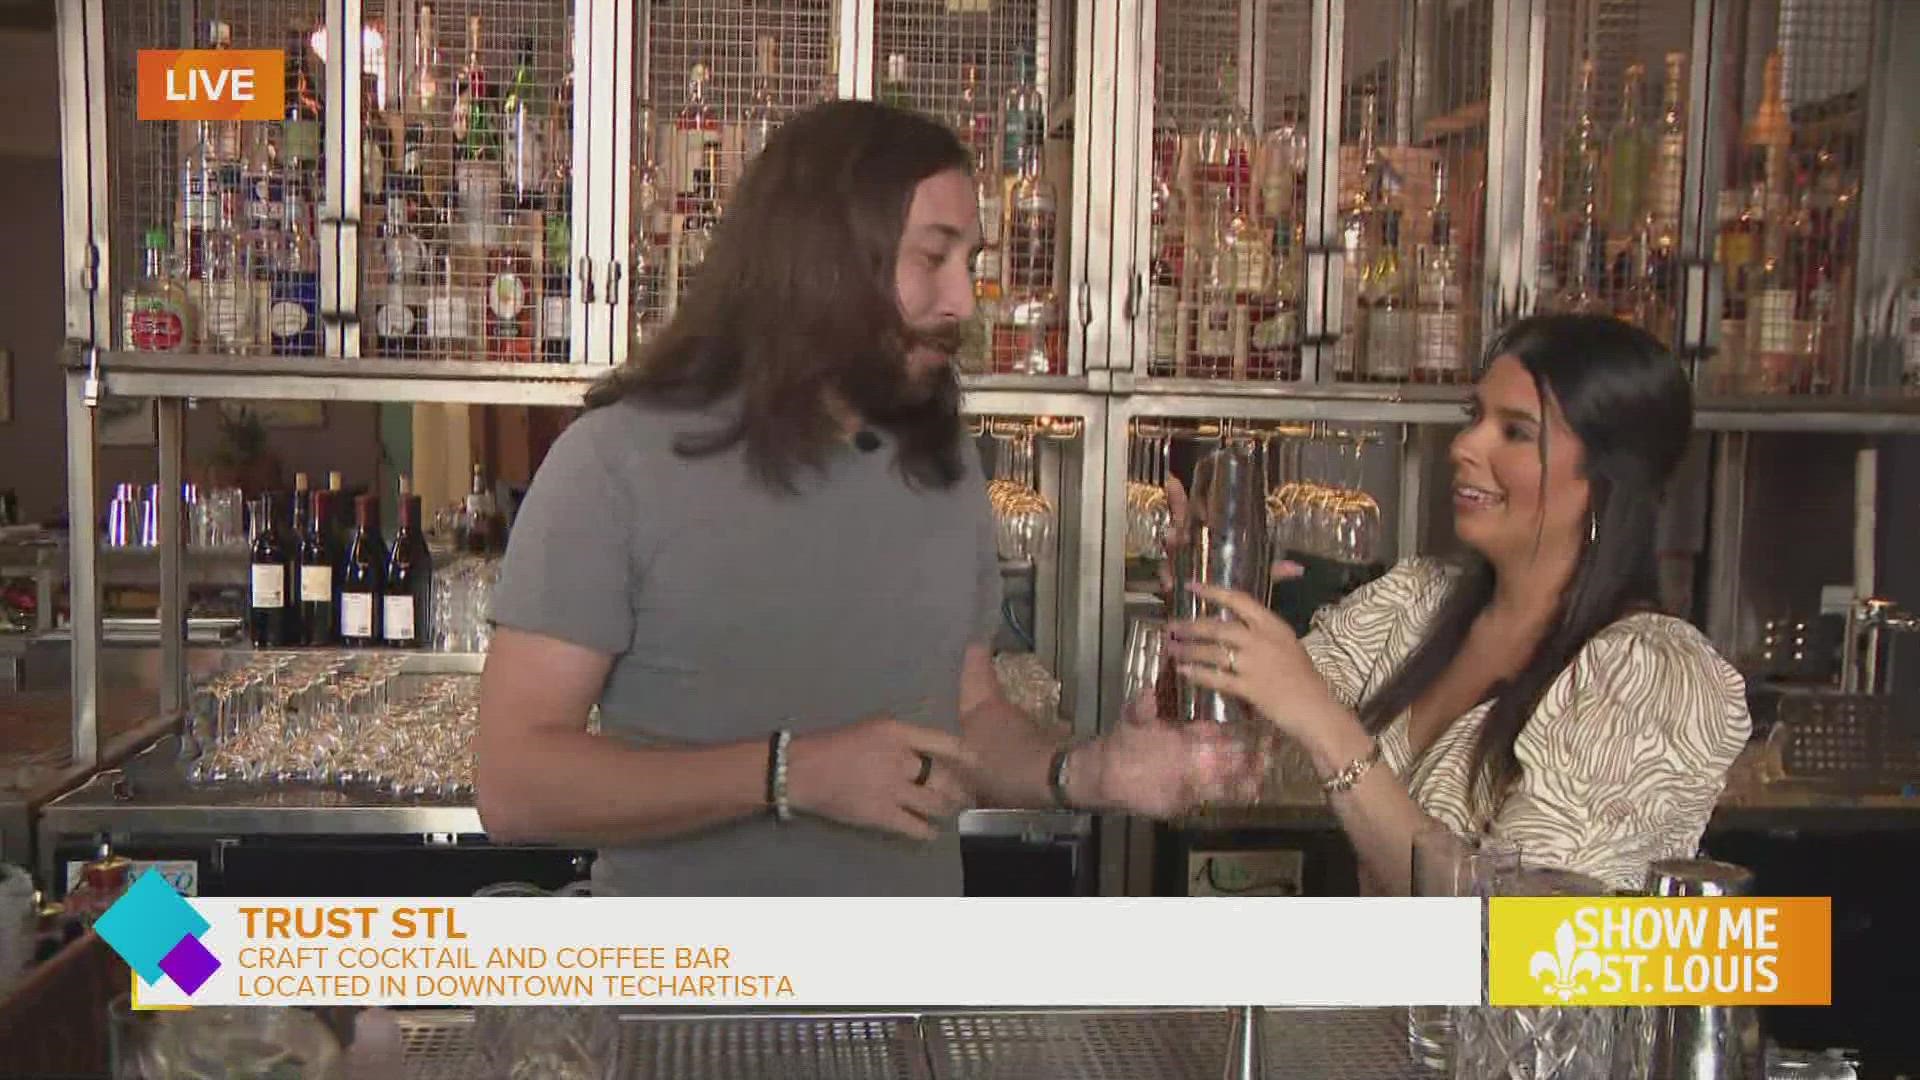 Dana DiPiazza speaks with Christopher Holt, CEO of TechArtista, about their unique crafted cocktails.